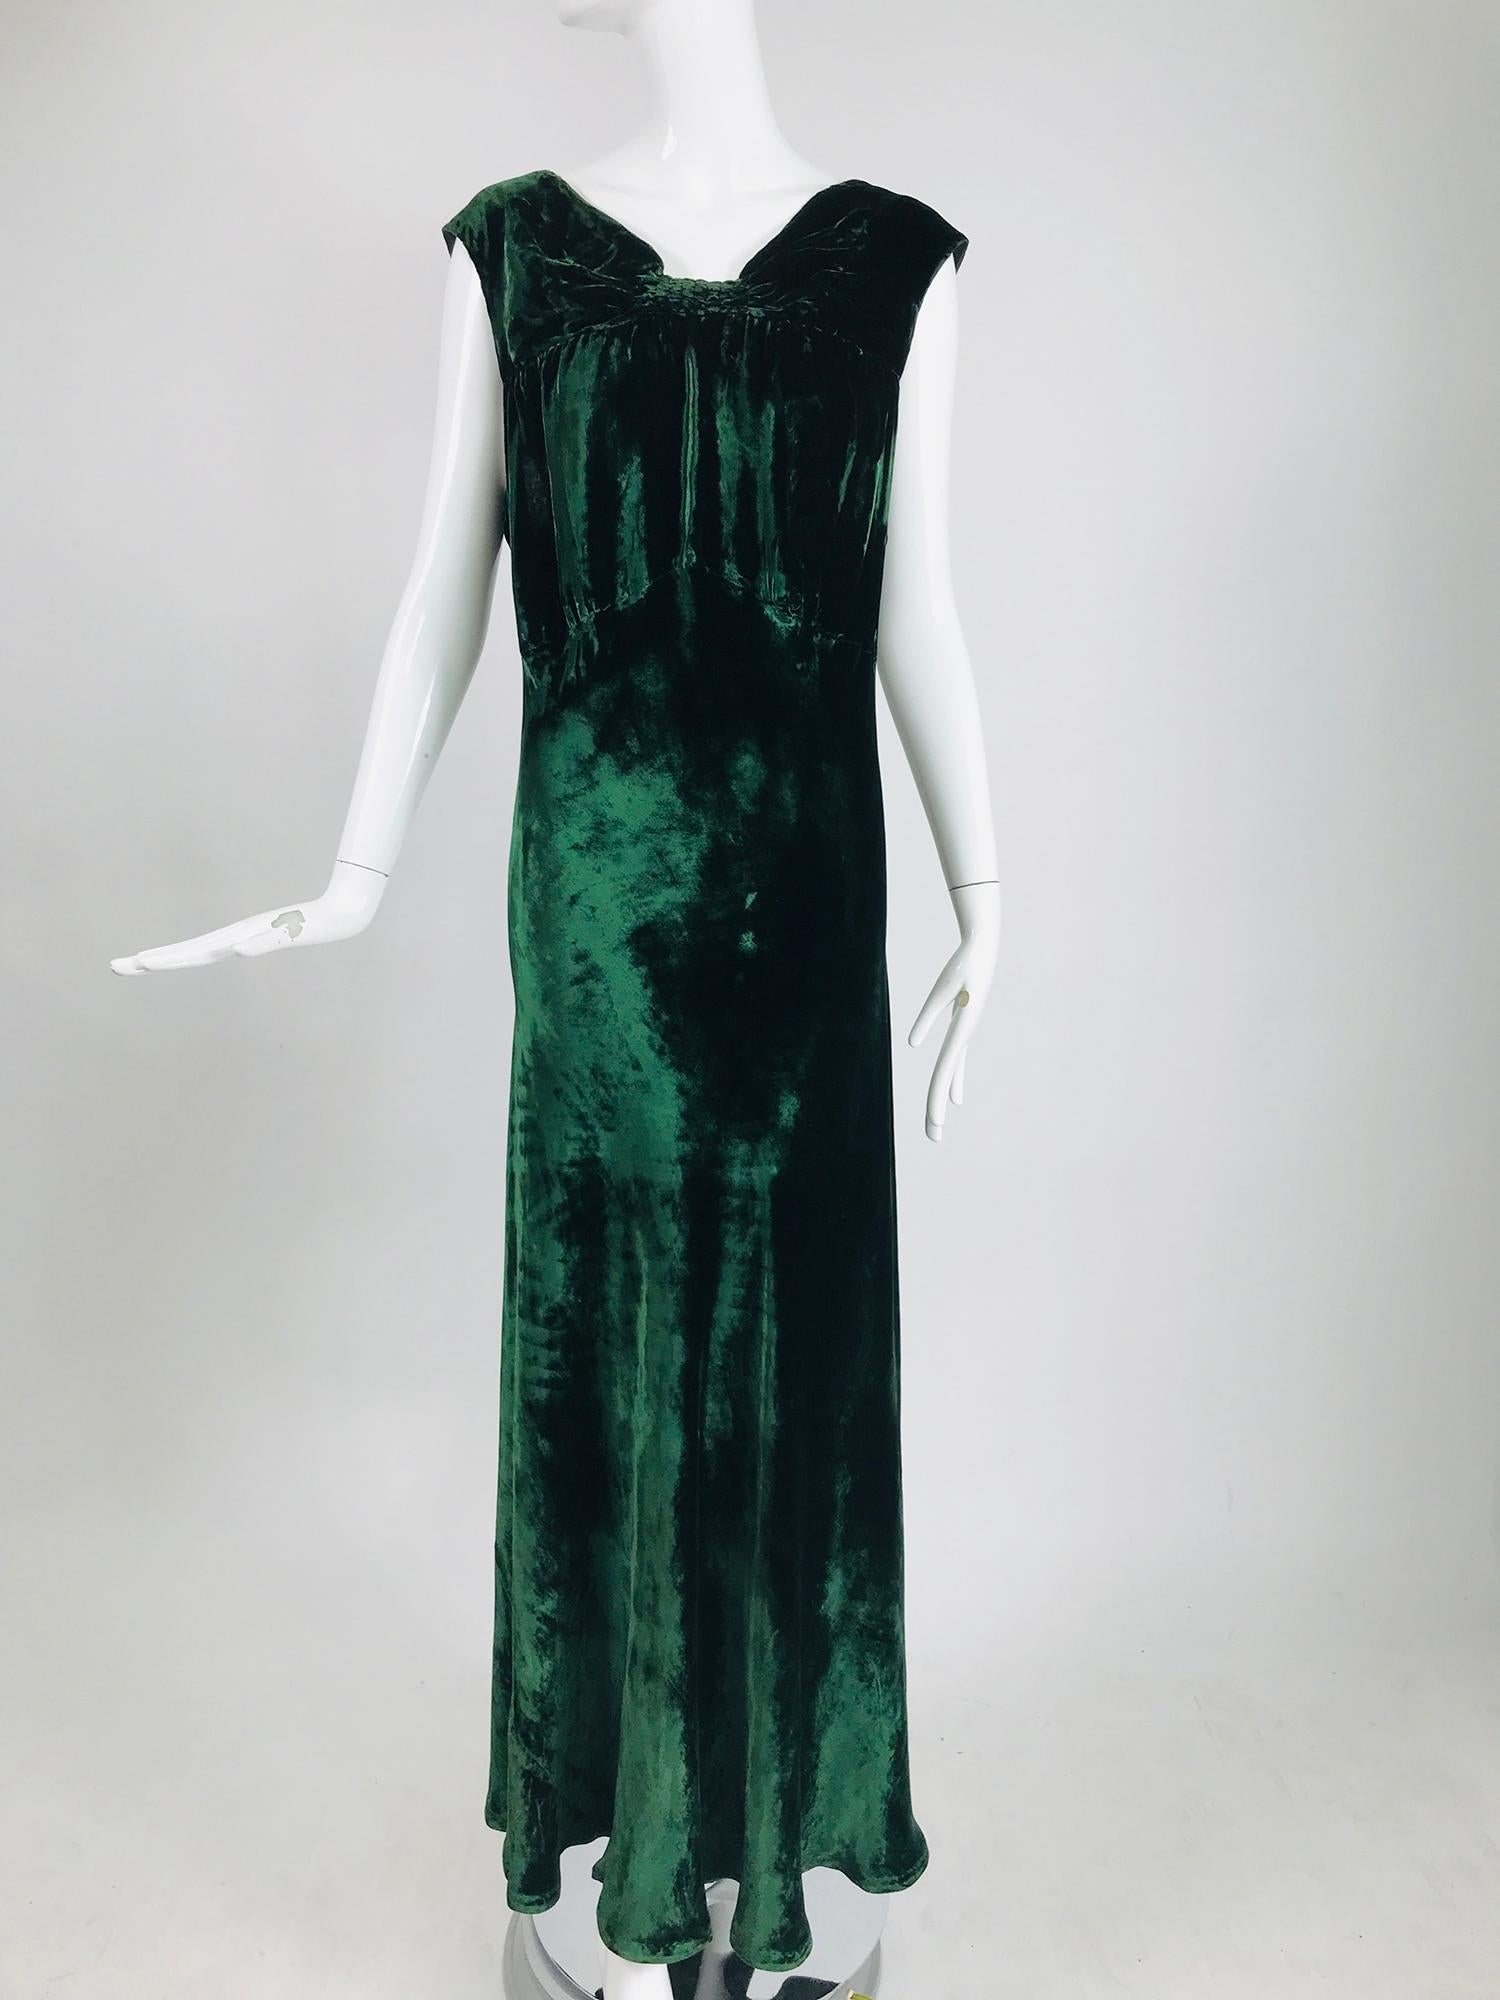 1930s forest green velvet bias cut dress and matching jacket. Beautiful velvet of silk and rayon. The dress has wide shoulder straps and an empire bodice with a long bias cut skirt. The center neck front is shirred, the bodice below is gathered to